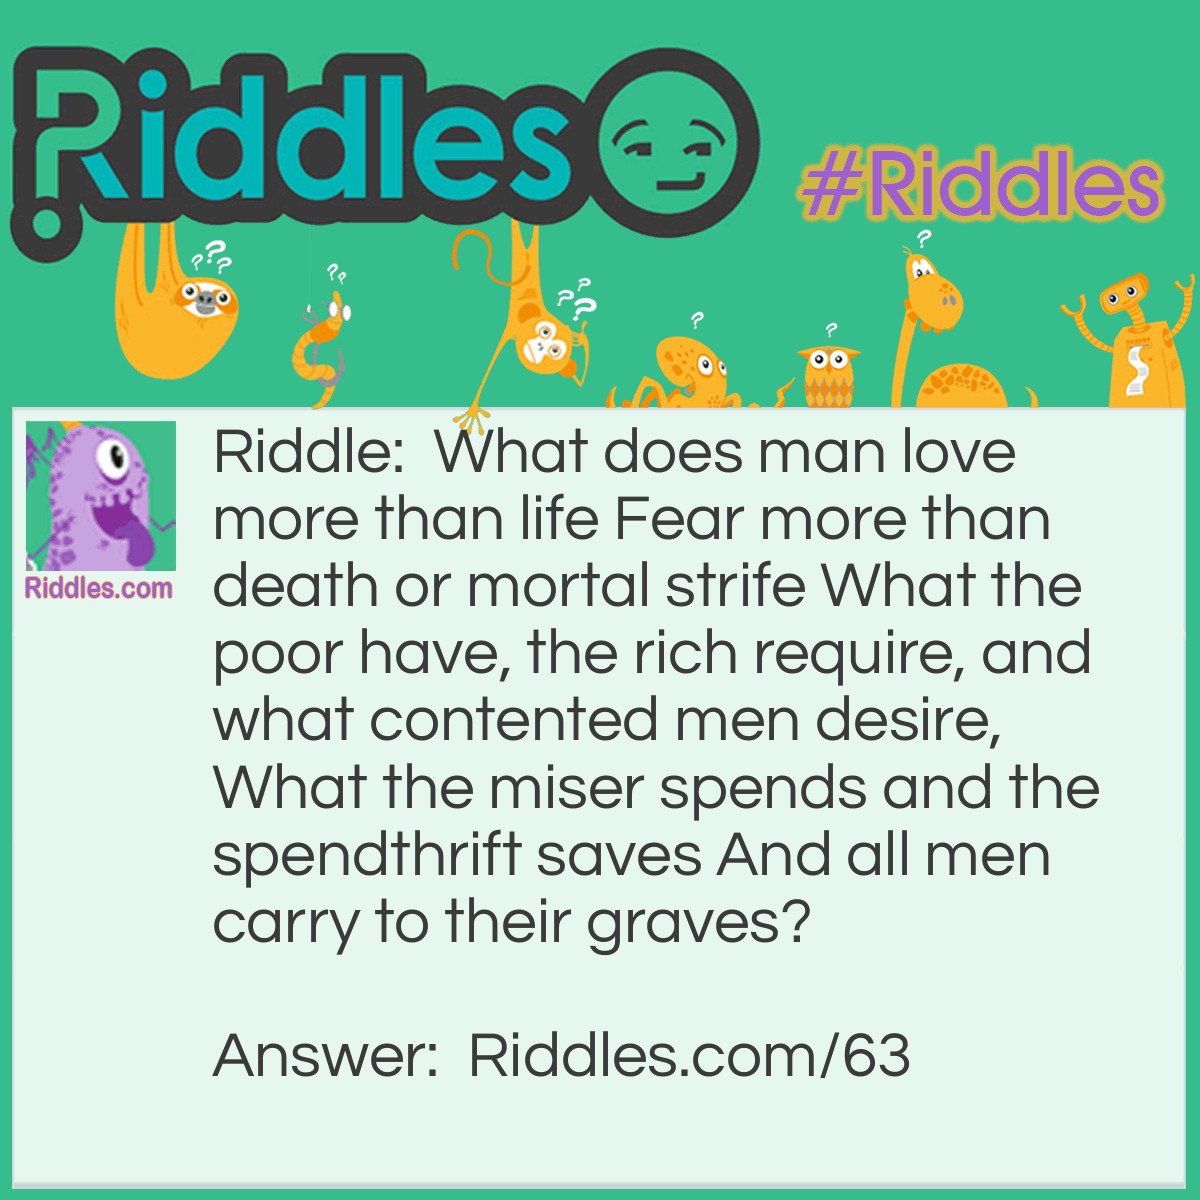 Riddle: What does man <strong><a href="https://www.riddles.com/quiz/love-riddles">love</a></strong> more than life Fear more than death or mortal strife What the poor have, the rich require, and what contented men desire, What the miser spends and the spendthrift saves And all men carry to their graves? Answer: Nothing.